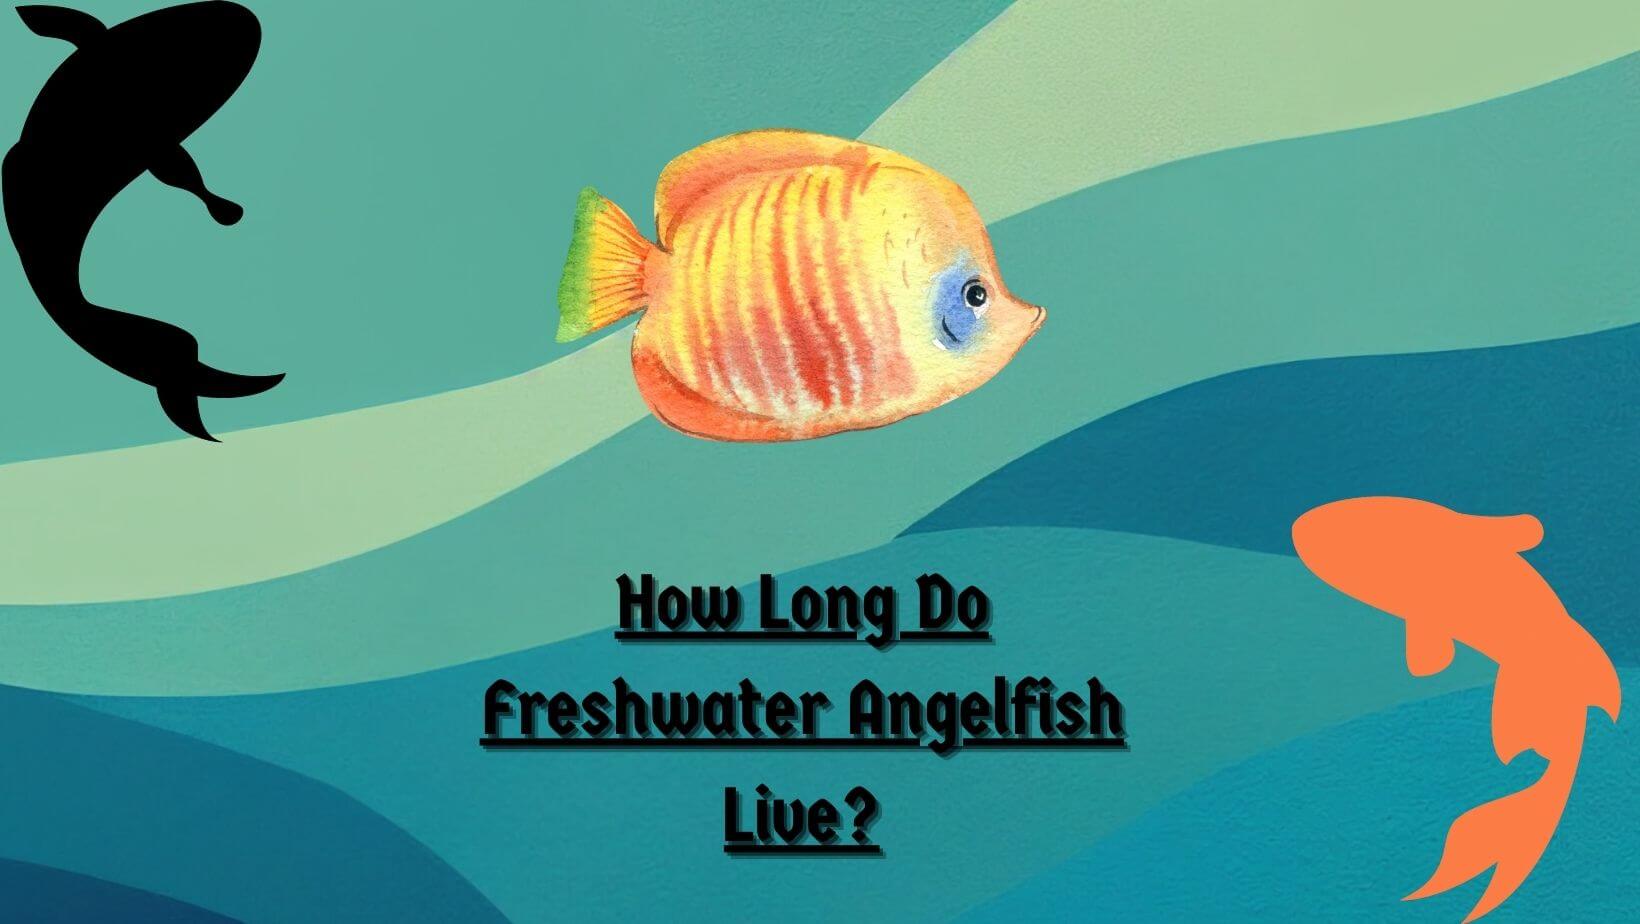 How Long Do Freshwater Angelfish Live